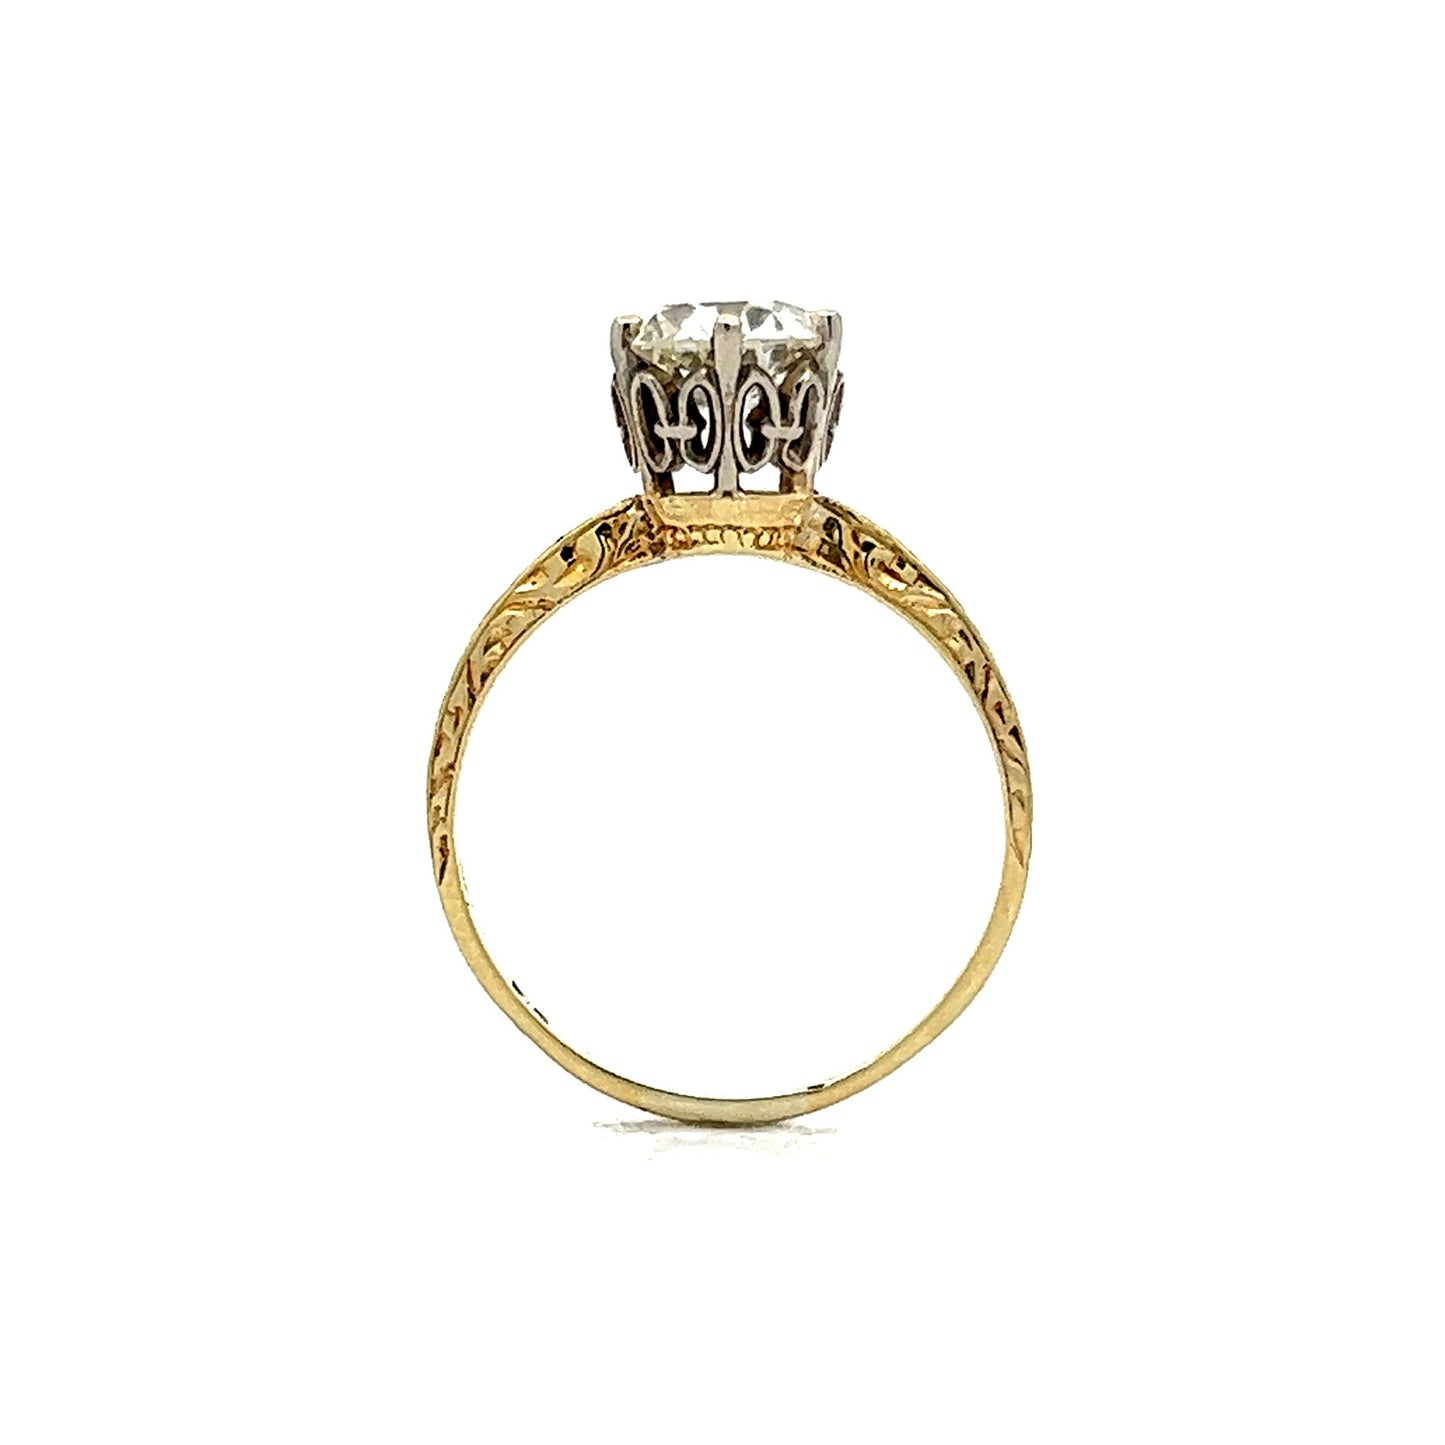 1.16 Art Deco Engagement Ring in 14k Yellow Gold